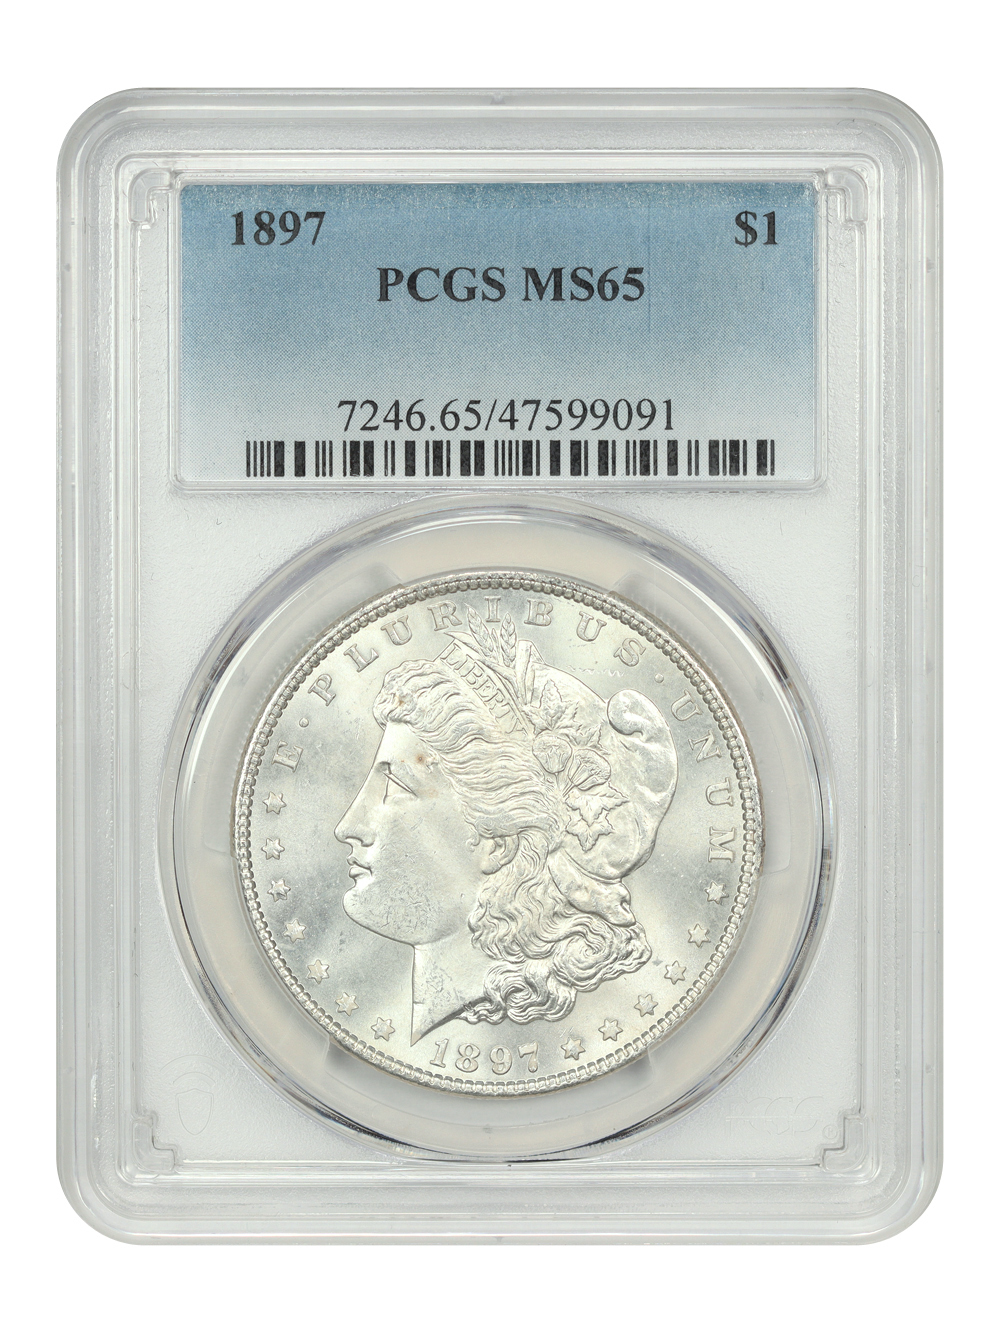 Primary image for 1897 $1 PCGS MS65